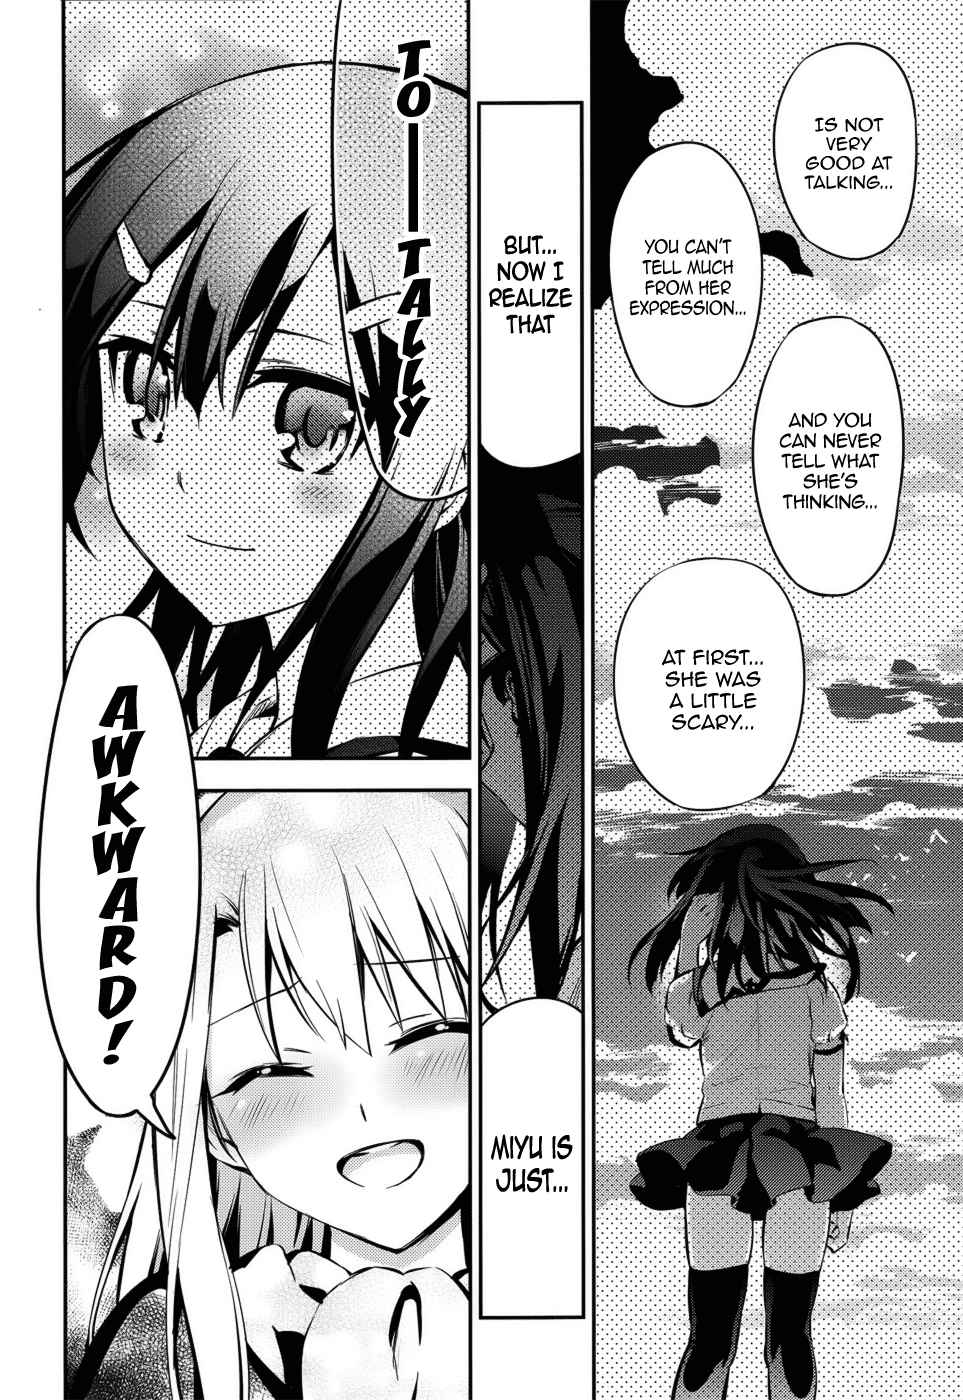 Fate/kaleid liner PRISMA☆ILLYA 3rei!! Vol. 1 Ch. 3 To the True Entrance